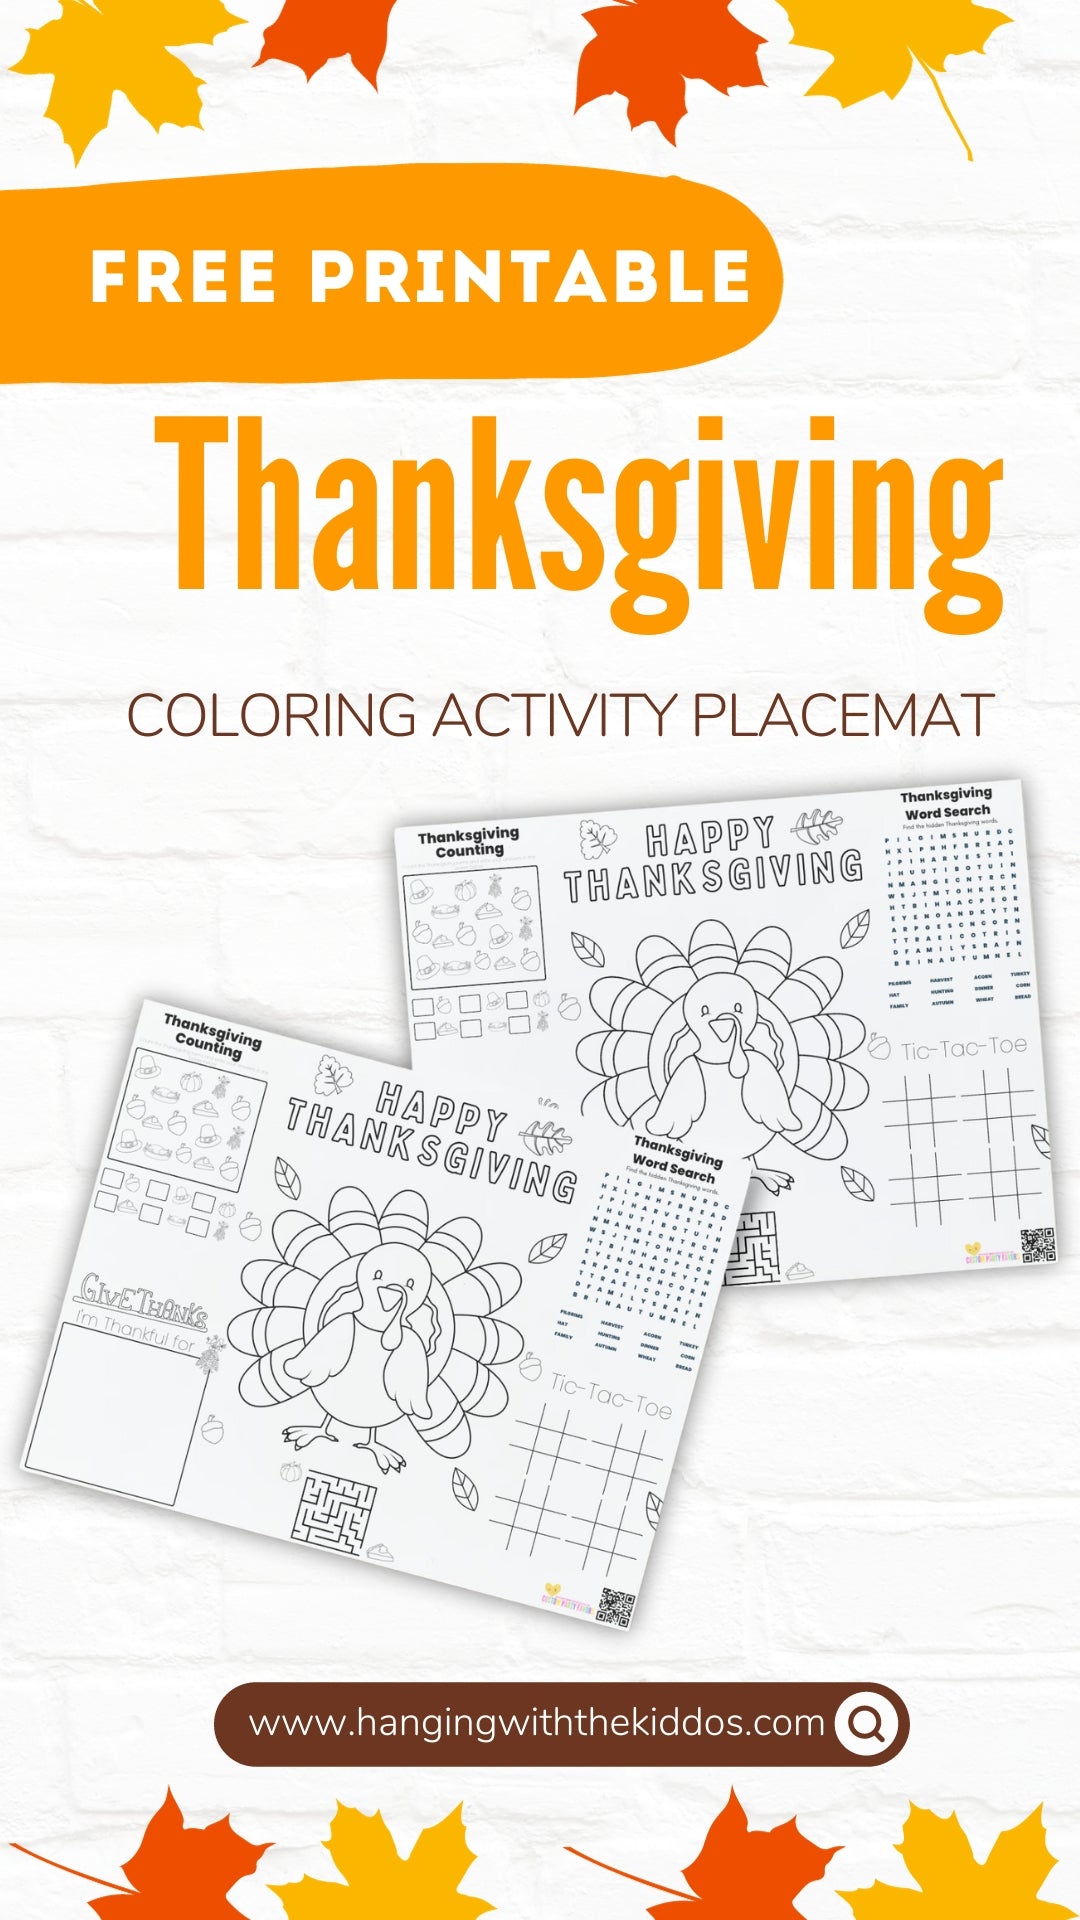 Thanksgiving Coloring Activity Placemat